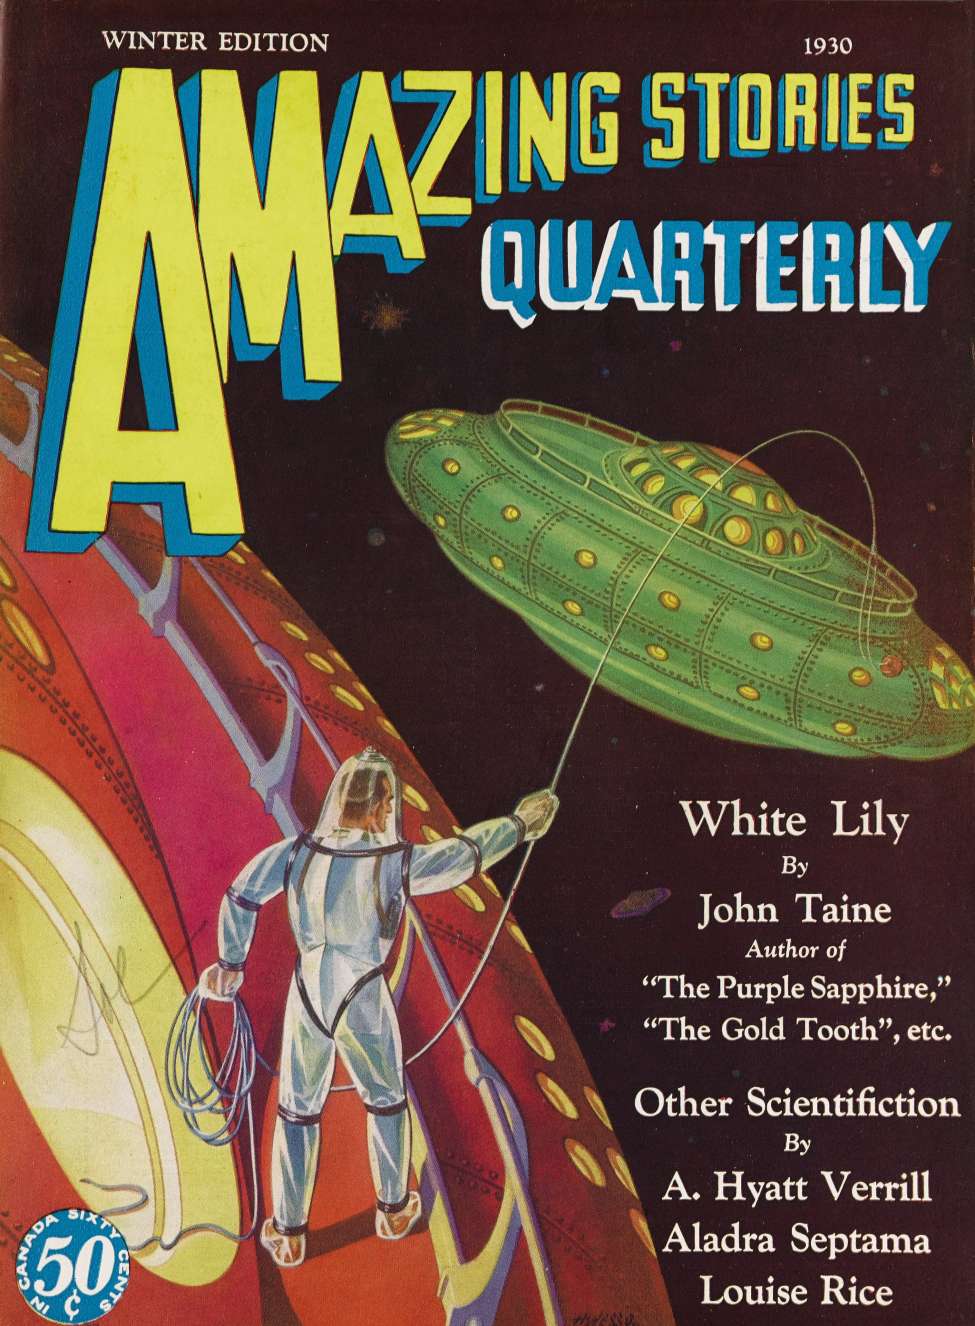 Book Cover For Amazing Stories Quarterly v3 1 - White Lily - John Taine